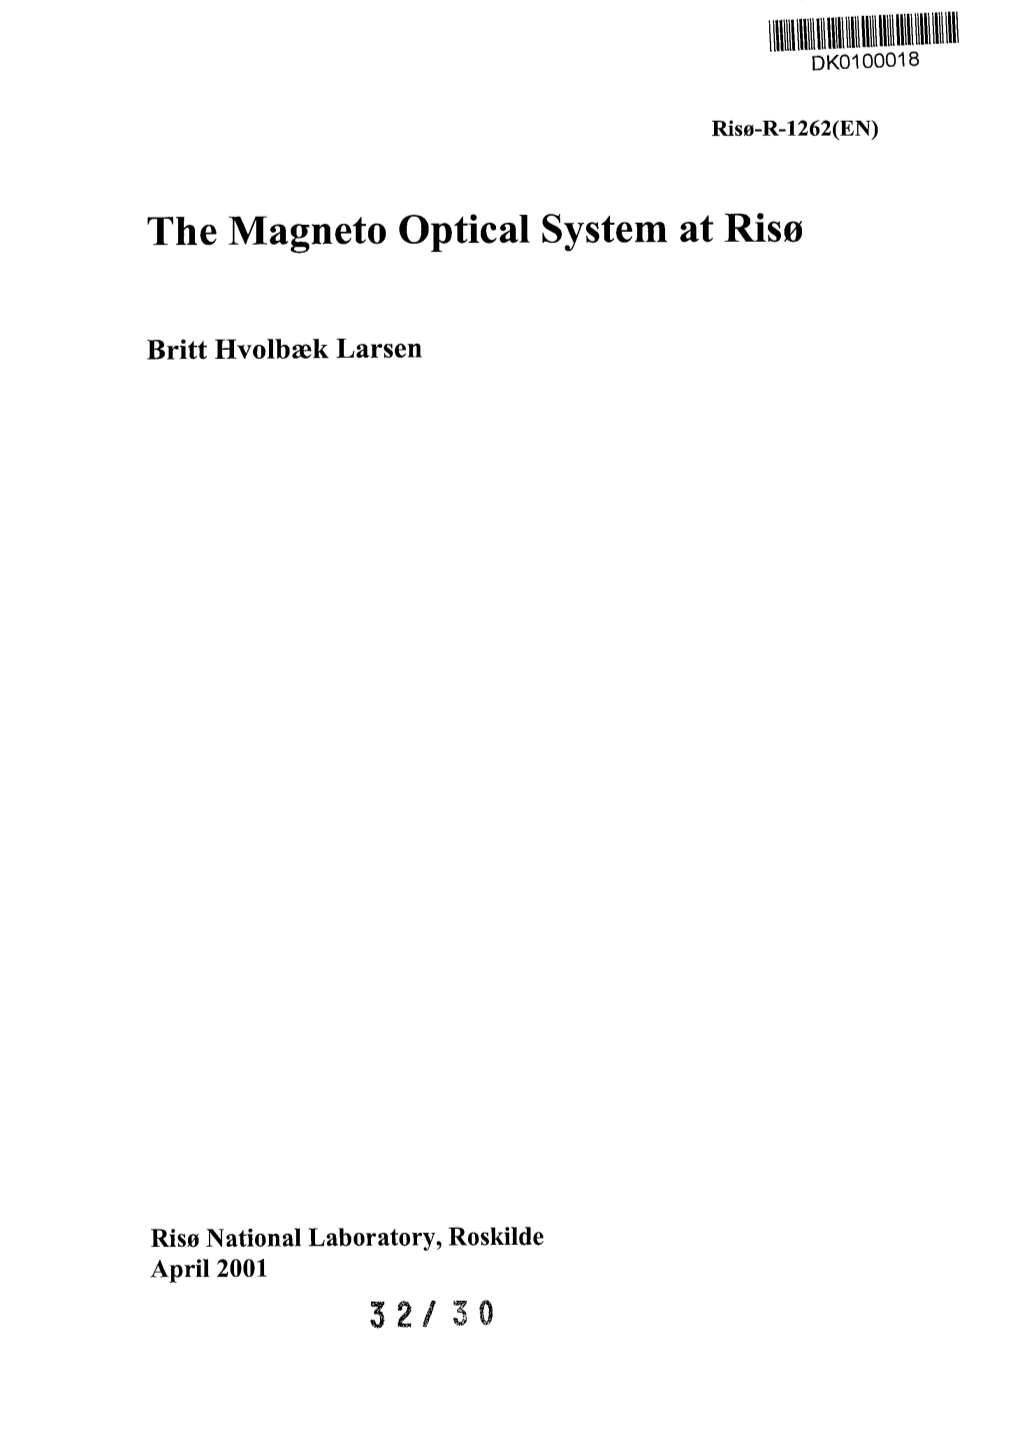 The Magneto Optical System at Rise